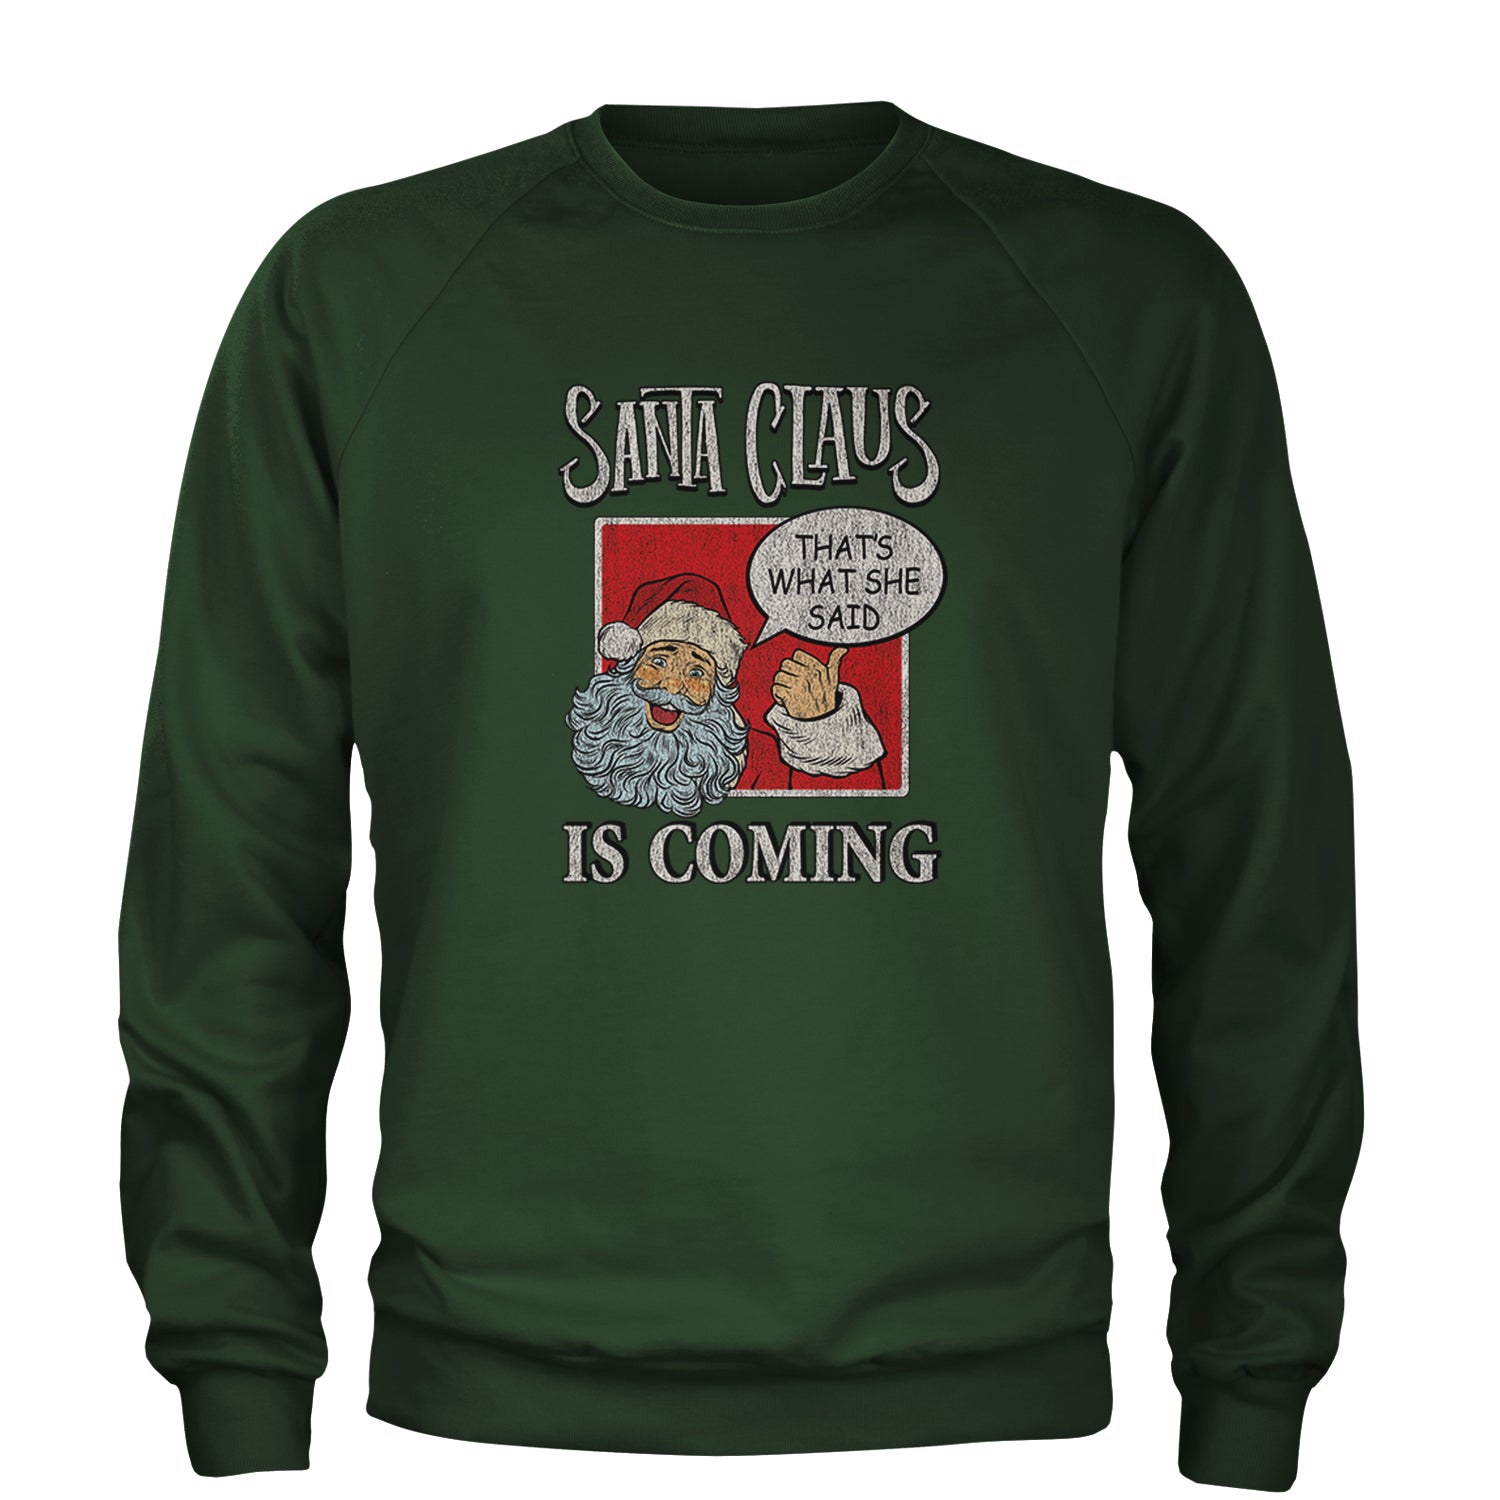 Santa Claus Is Coming - That's What She Said Adult Crewneck Sweatshirt christmas, dunder, holiday, michael, mifflin, office, sweater, ugly, xmas by Expression Tees